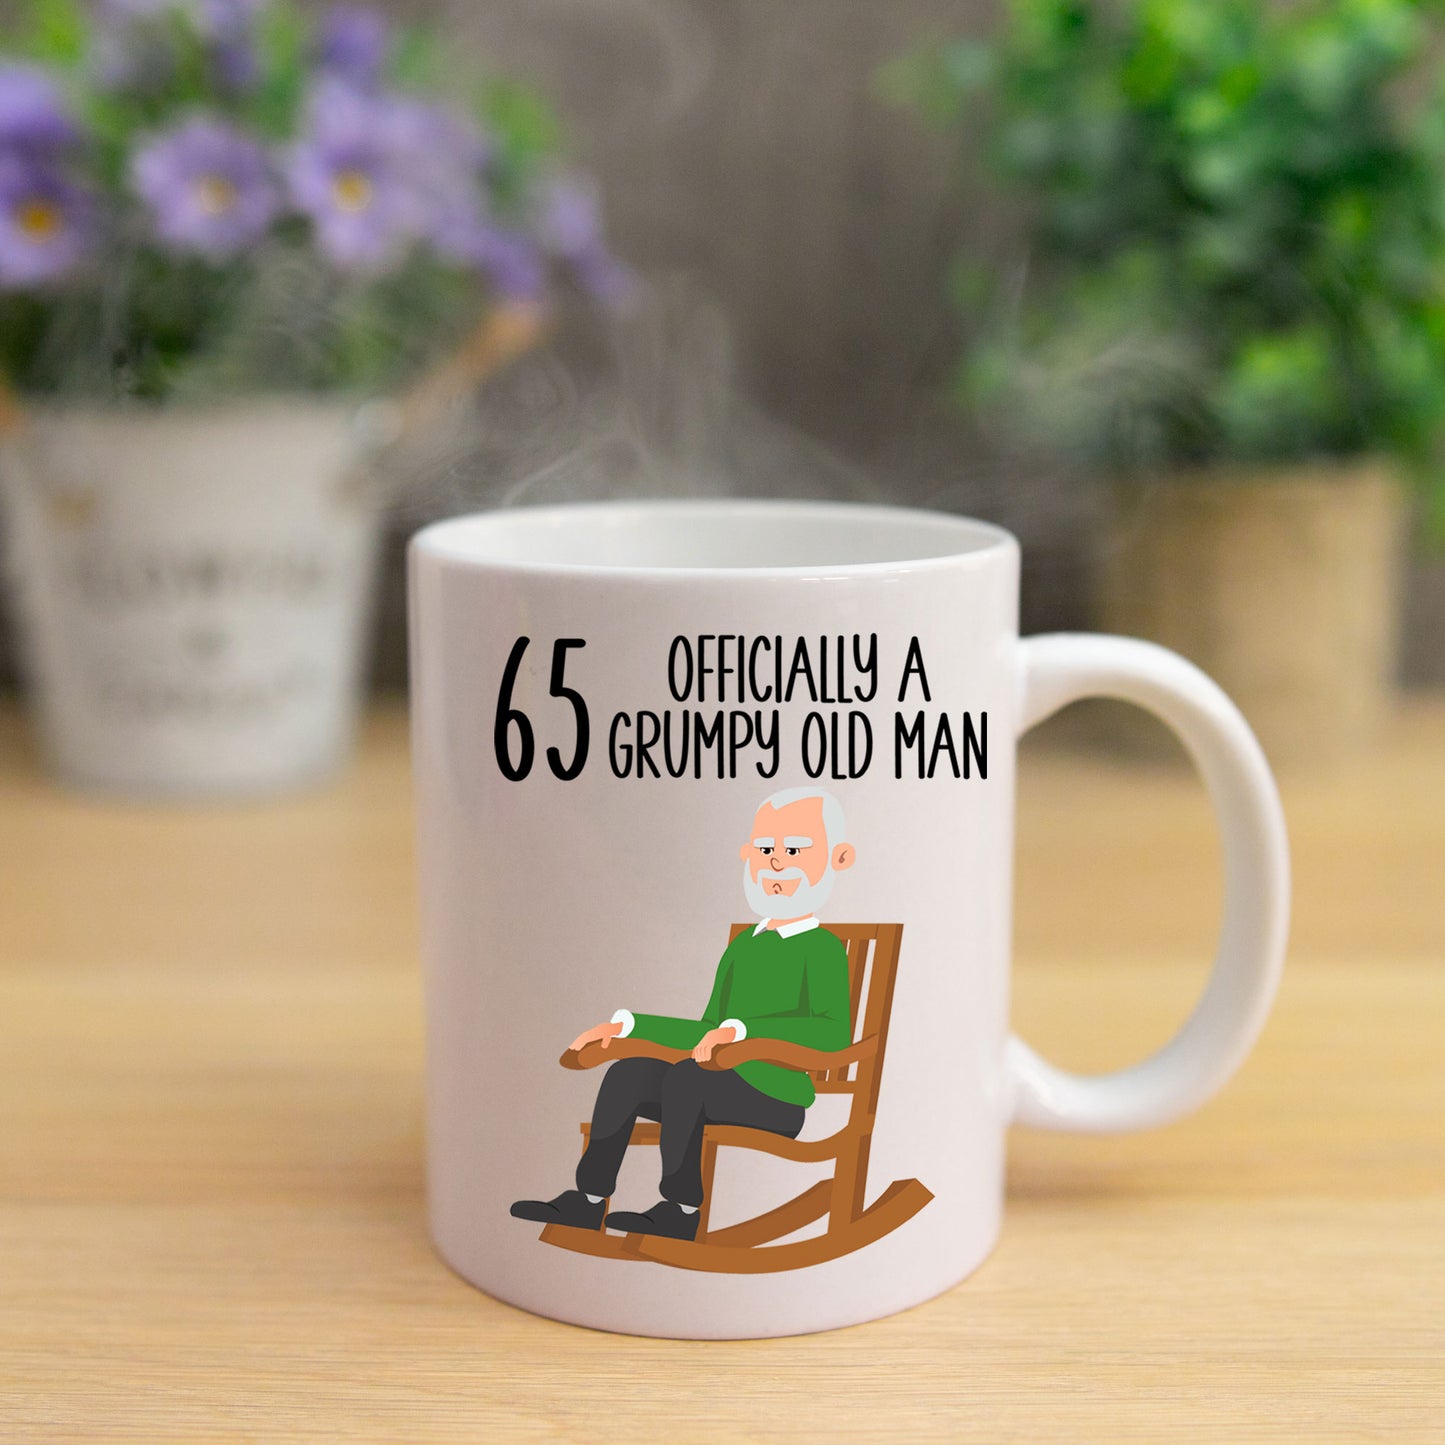 65 Officially A Grumpy Old Man Mug and/or Coaster Gift  - Always Looking Good -   